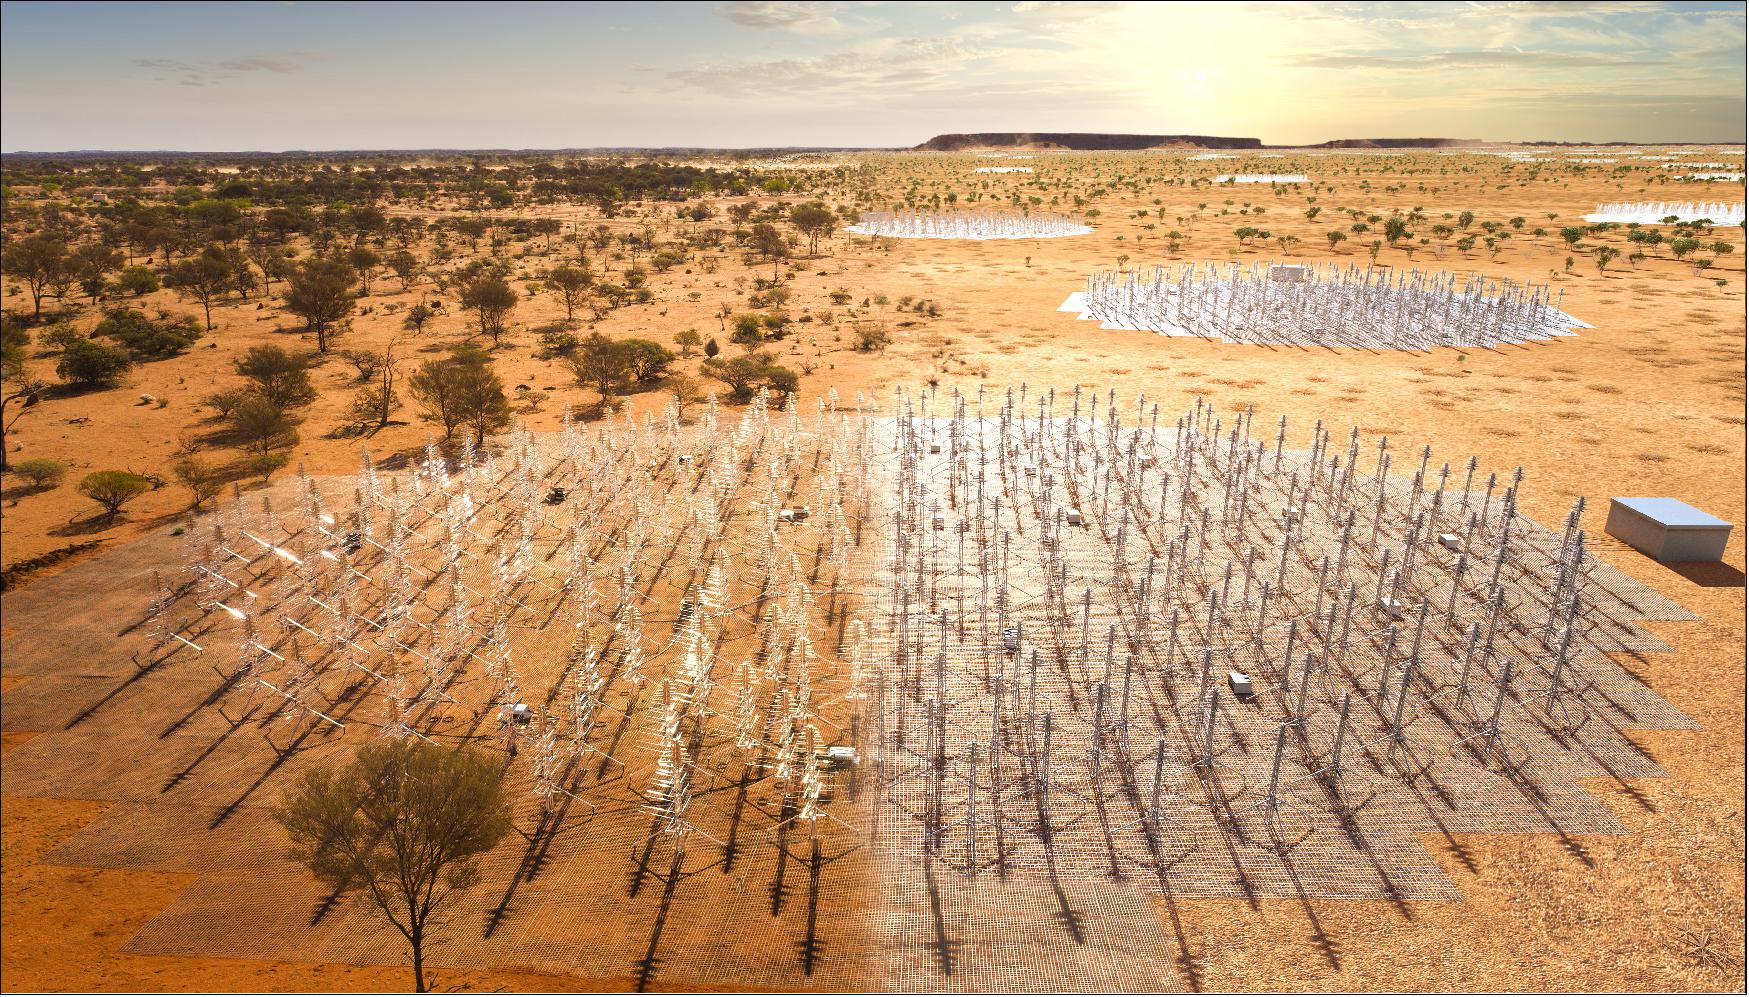 Figure 38: Composite image of the SKA-Low telescope in Western Australia. The image blends a real photo (on the left) of the SKA-Low prototype station AAVS2.0 which is already on-site, with an artist’s impression of the future SKA-Low stations as they will look when constructed. These dipole antennas, which will number in their hundreds of thousands, will survey the radio sky at frequencies as low as 50MHz (image credit: ICRAR, SKAO)